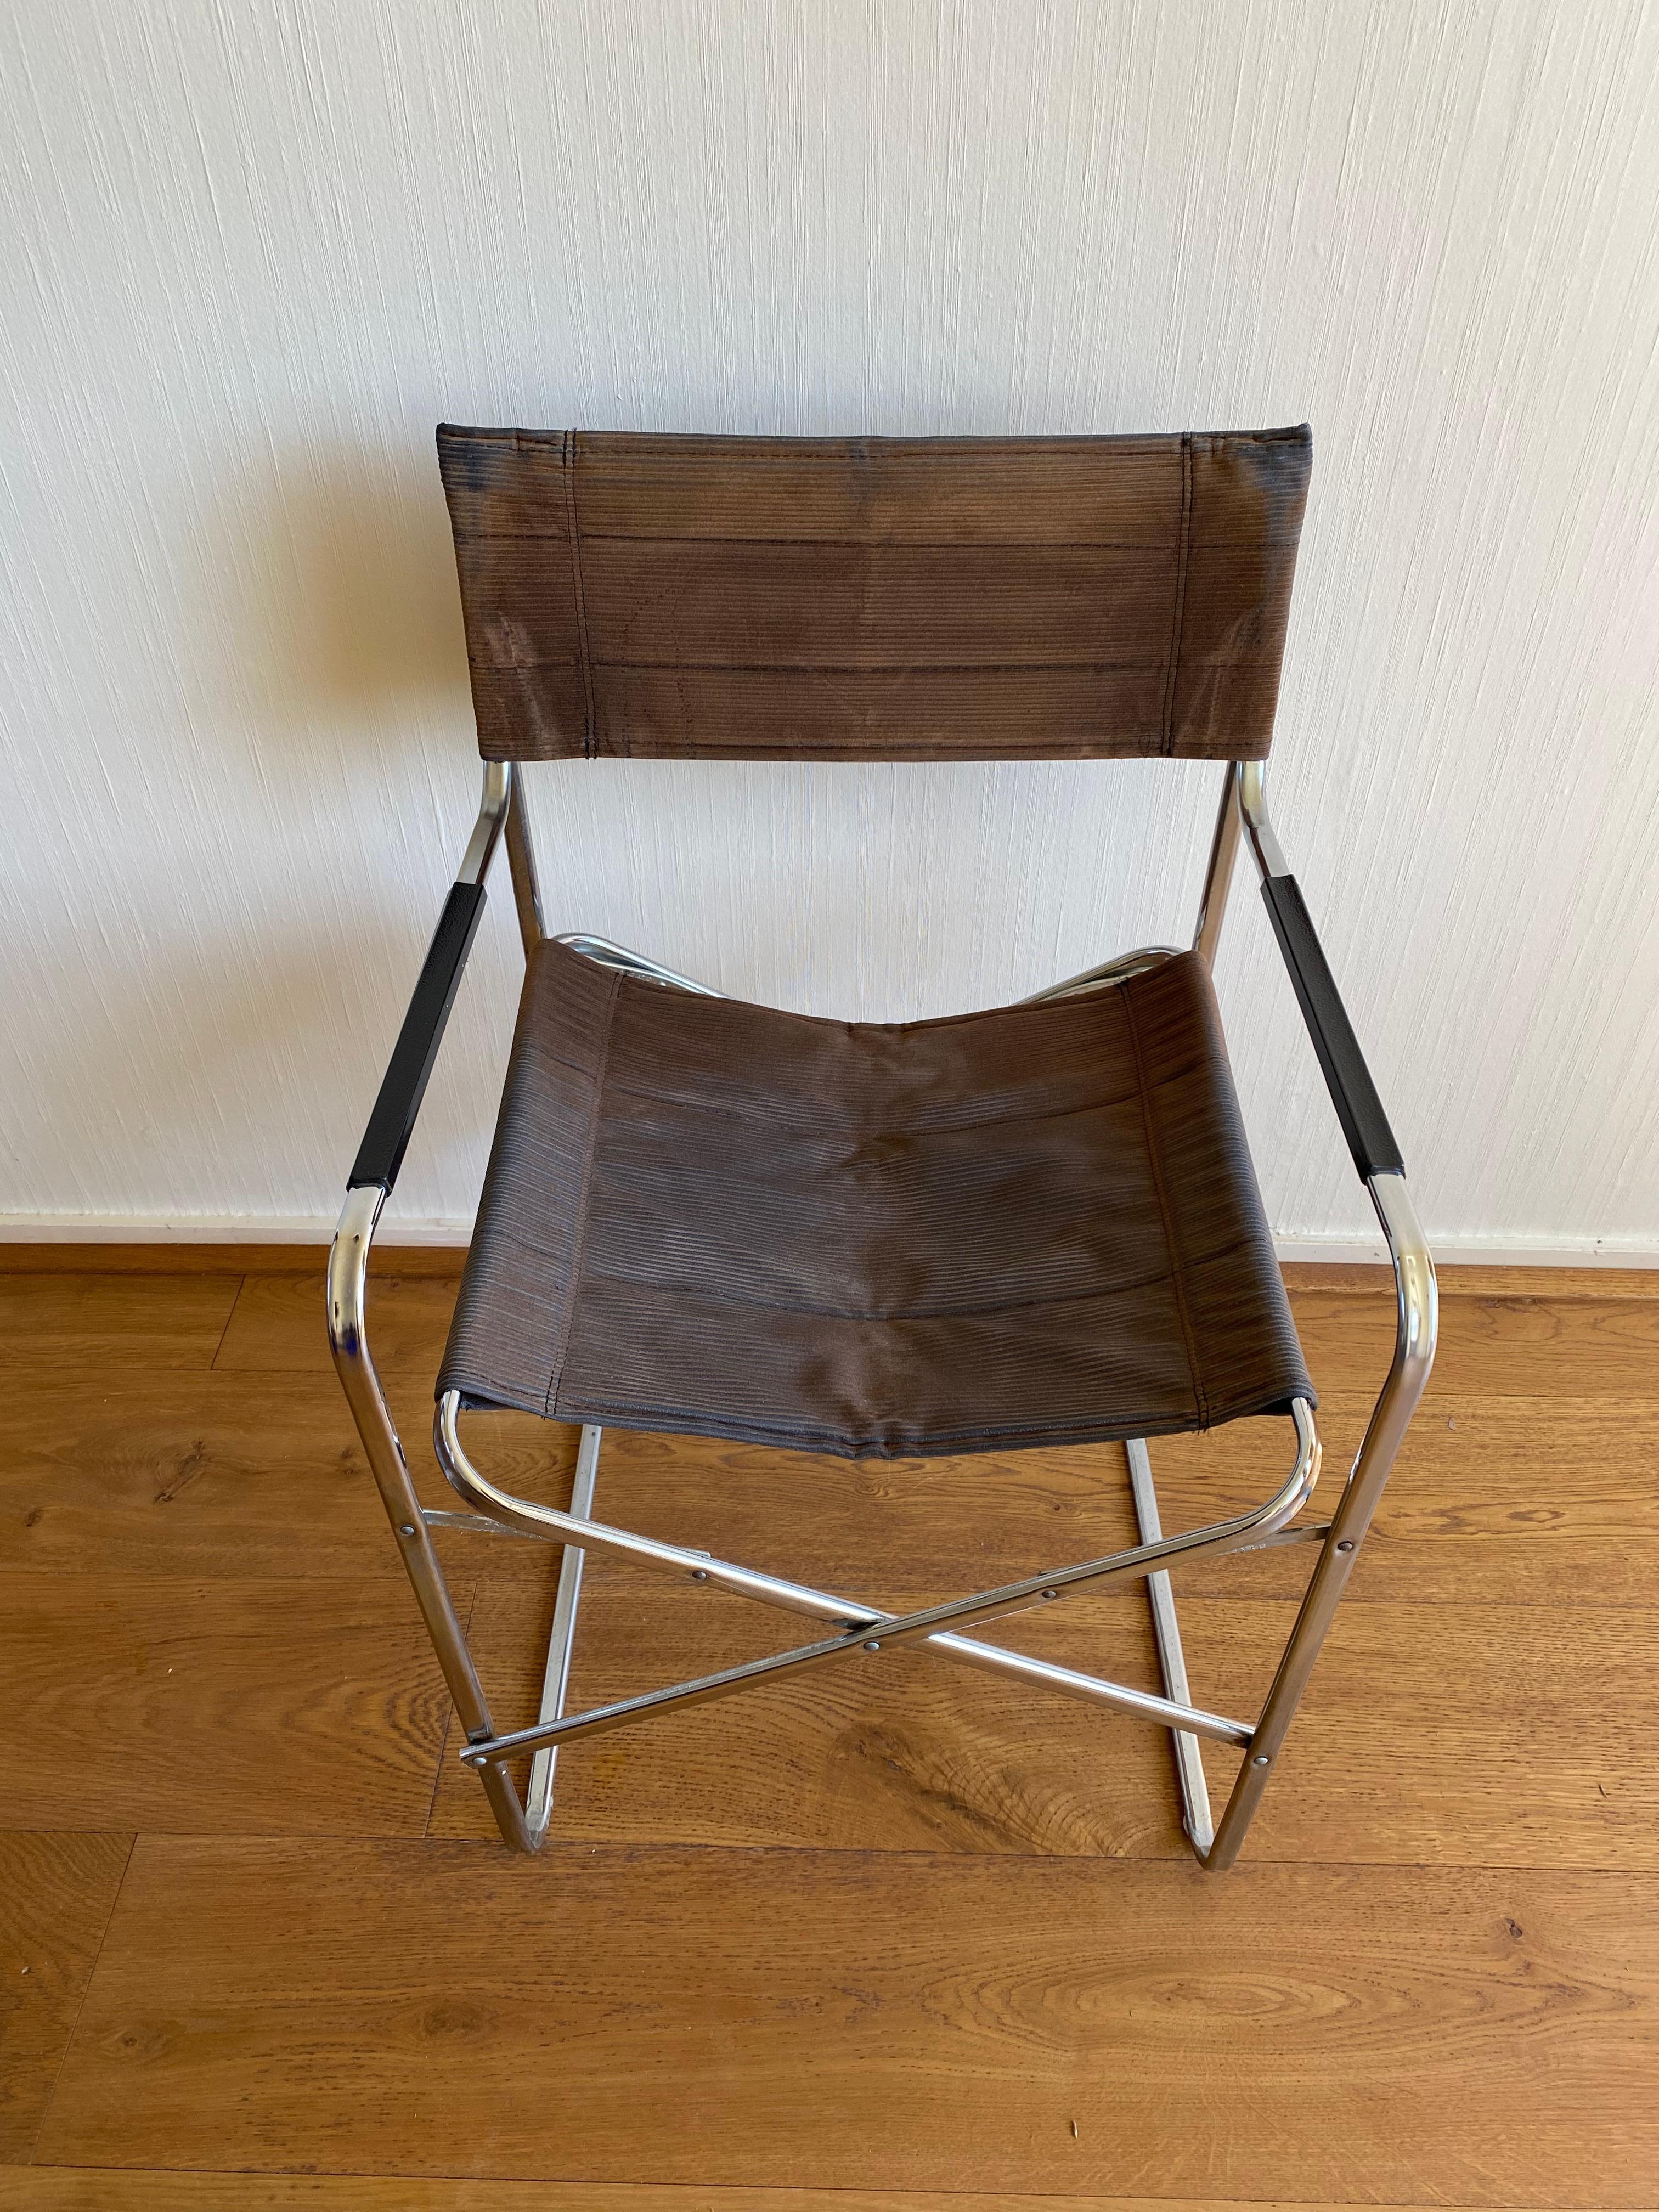 Mid-Century Modern Italian Folding Chair in Style of the Gae Aulenti April Chair For Sale 8